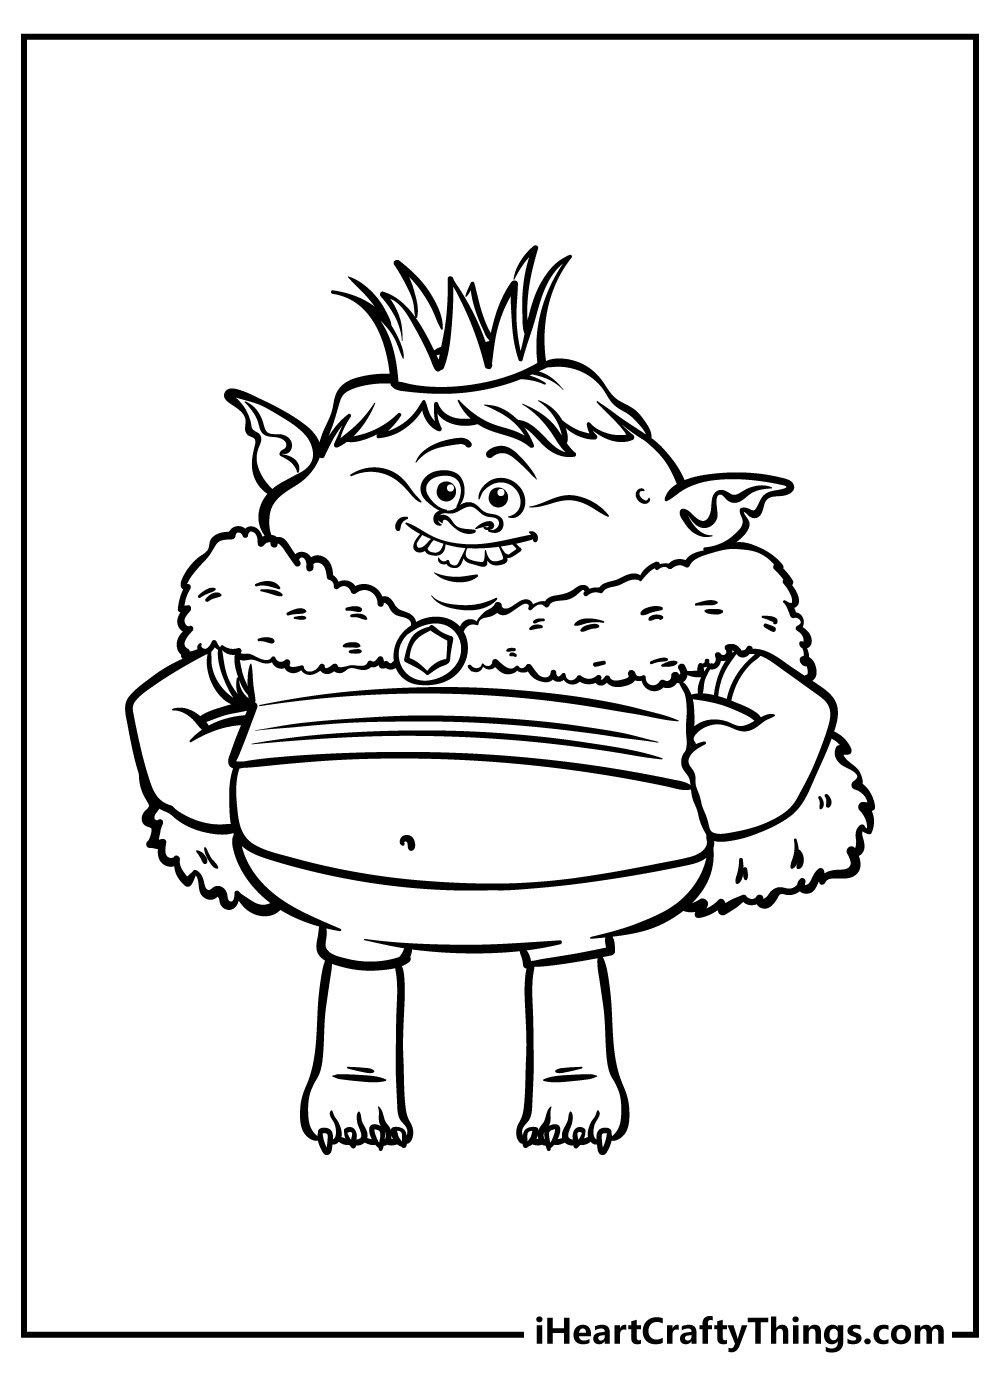 Printable Troll Coloring Pages Updated 20